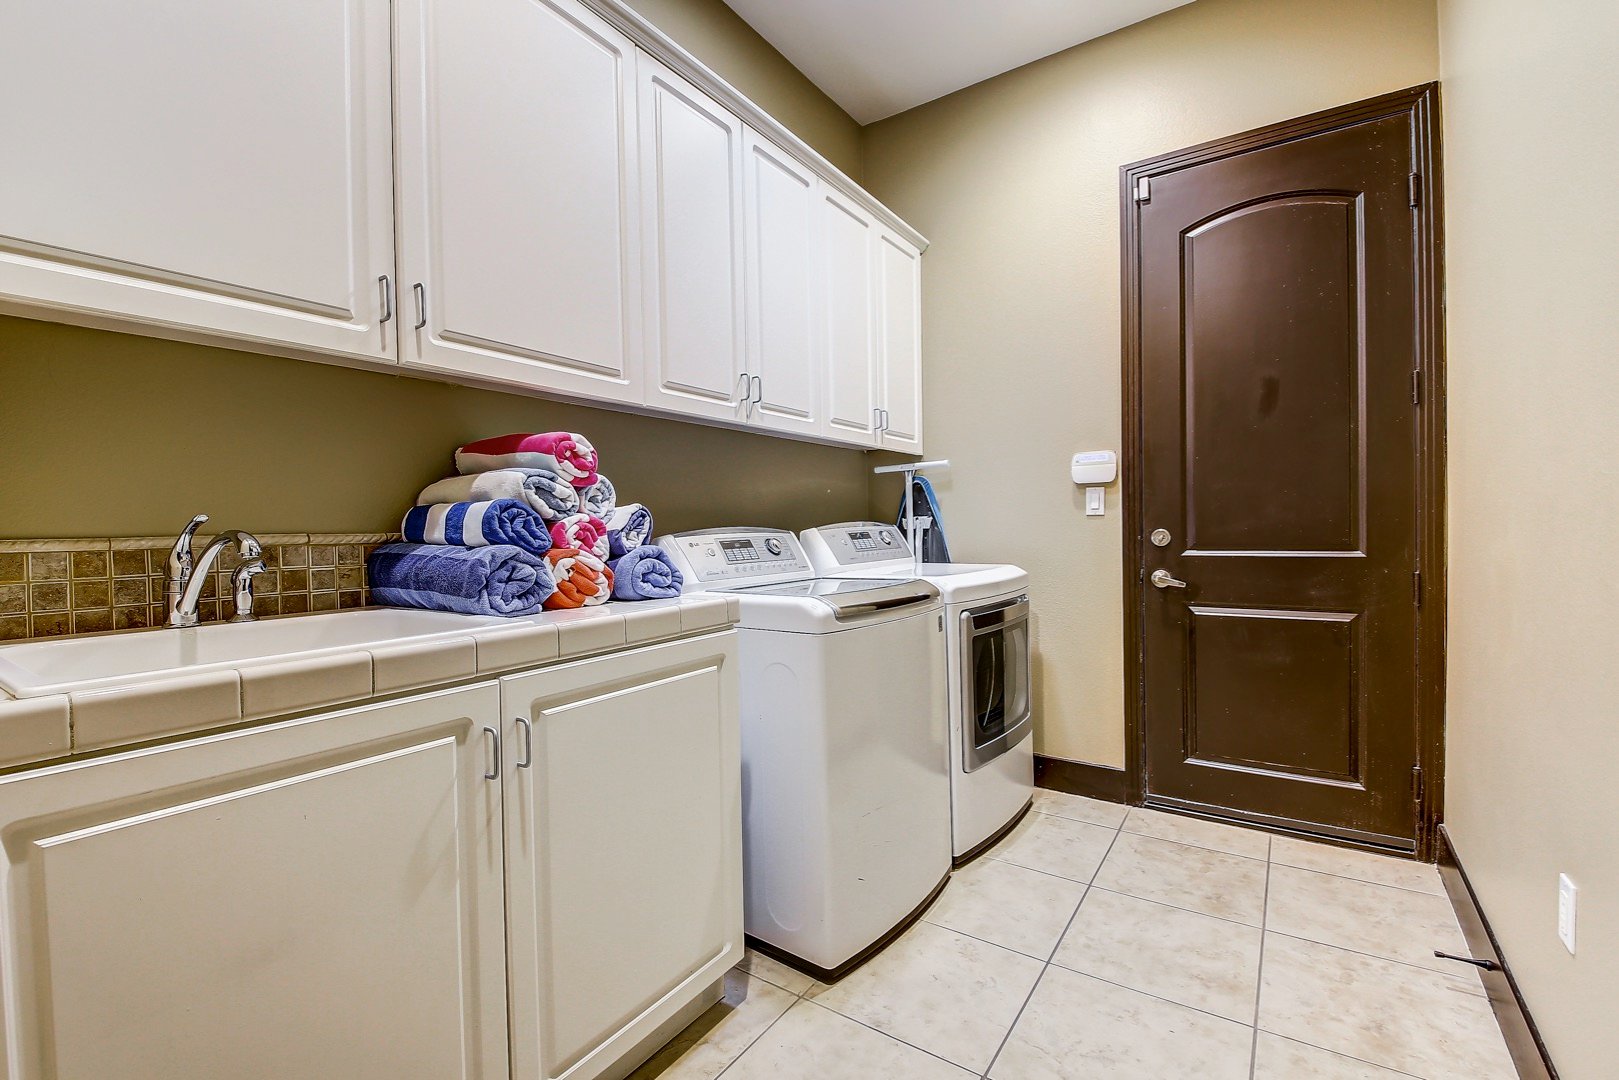 Laundry room has a washer and dryer so you can go home with clean clothes if you'd like.